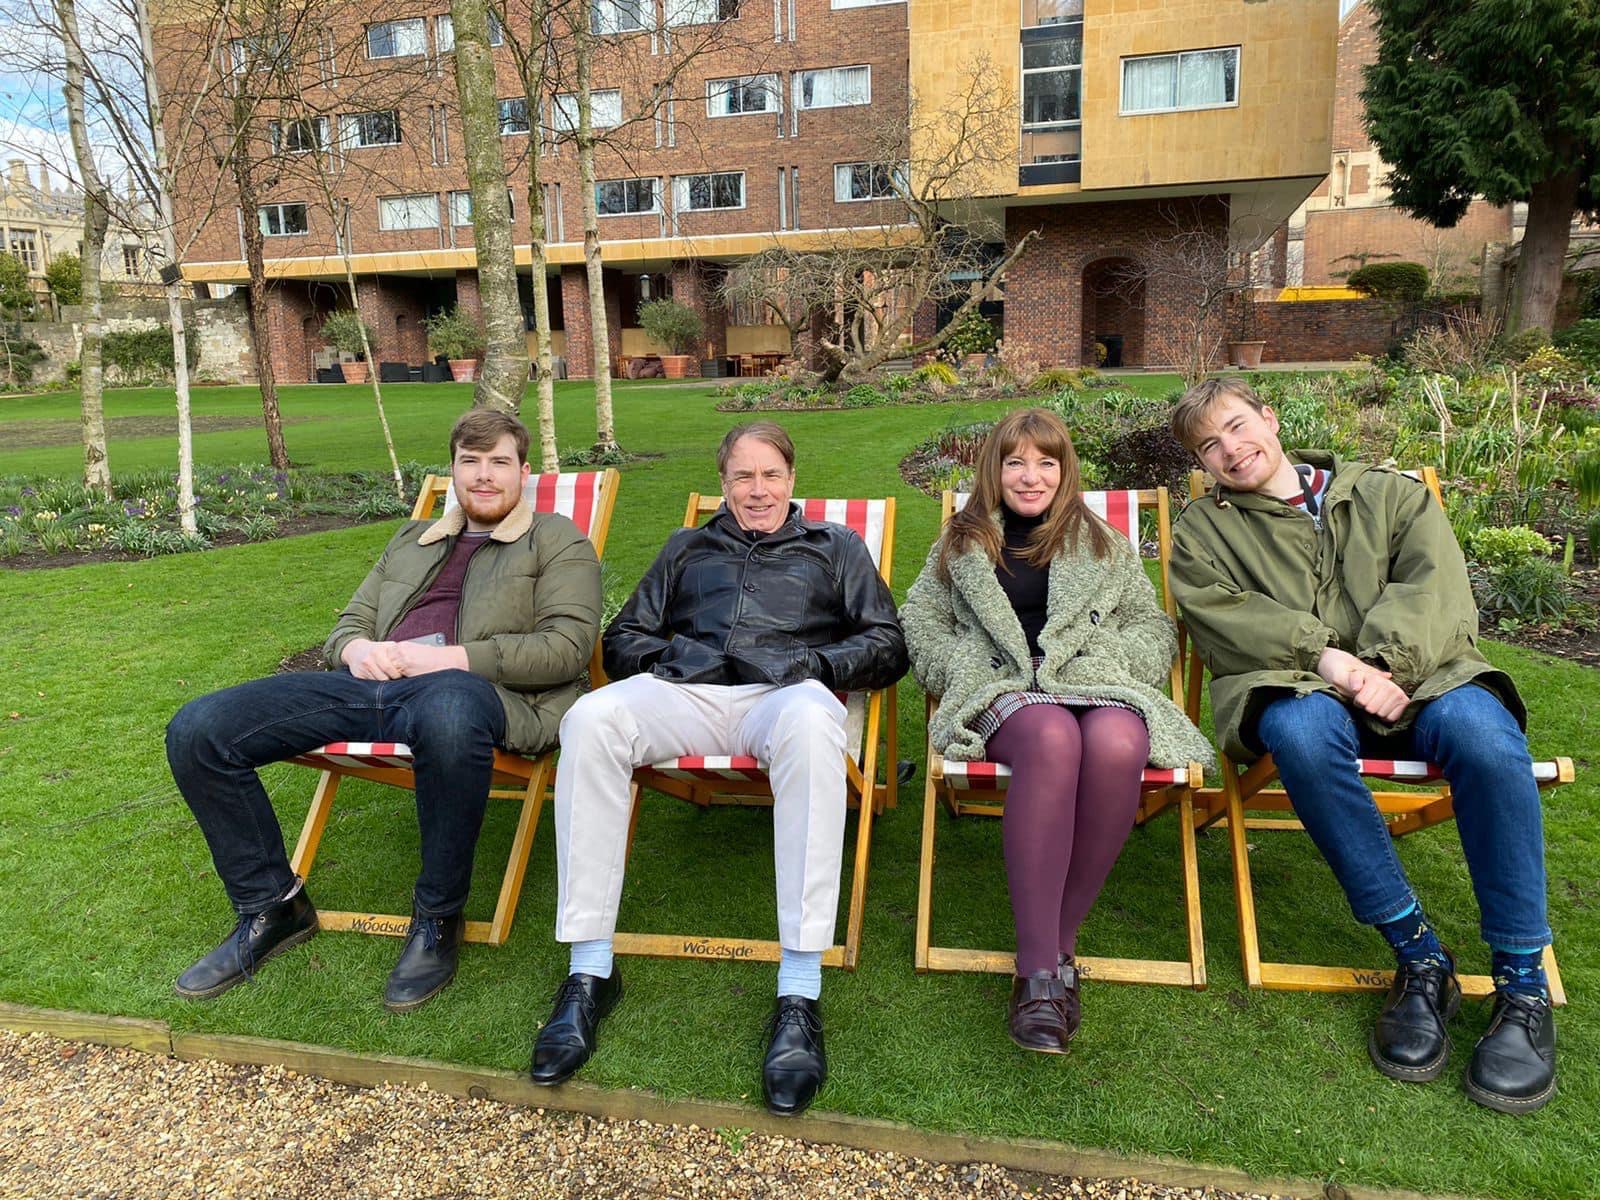 Four people sit smiling on deckchairs. They are sat on a green lawn, with trees and a brick building in the background. The people look relaxed and happy.